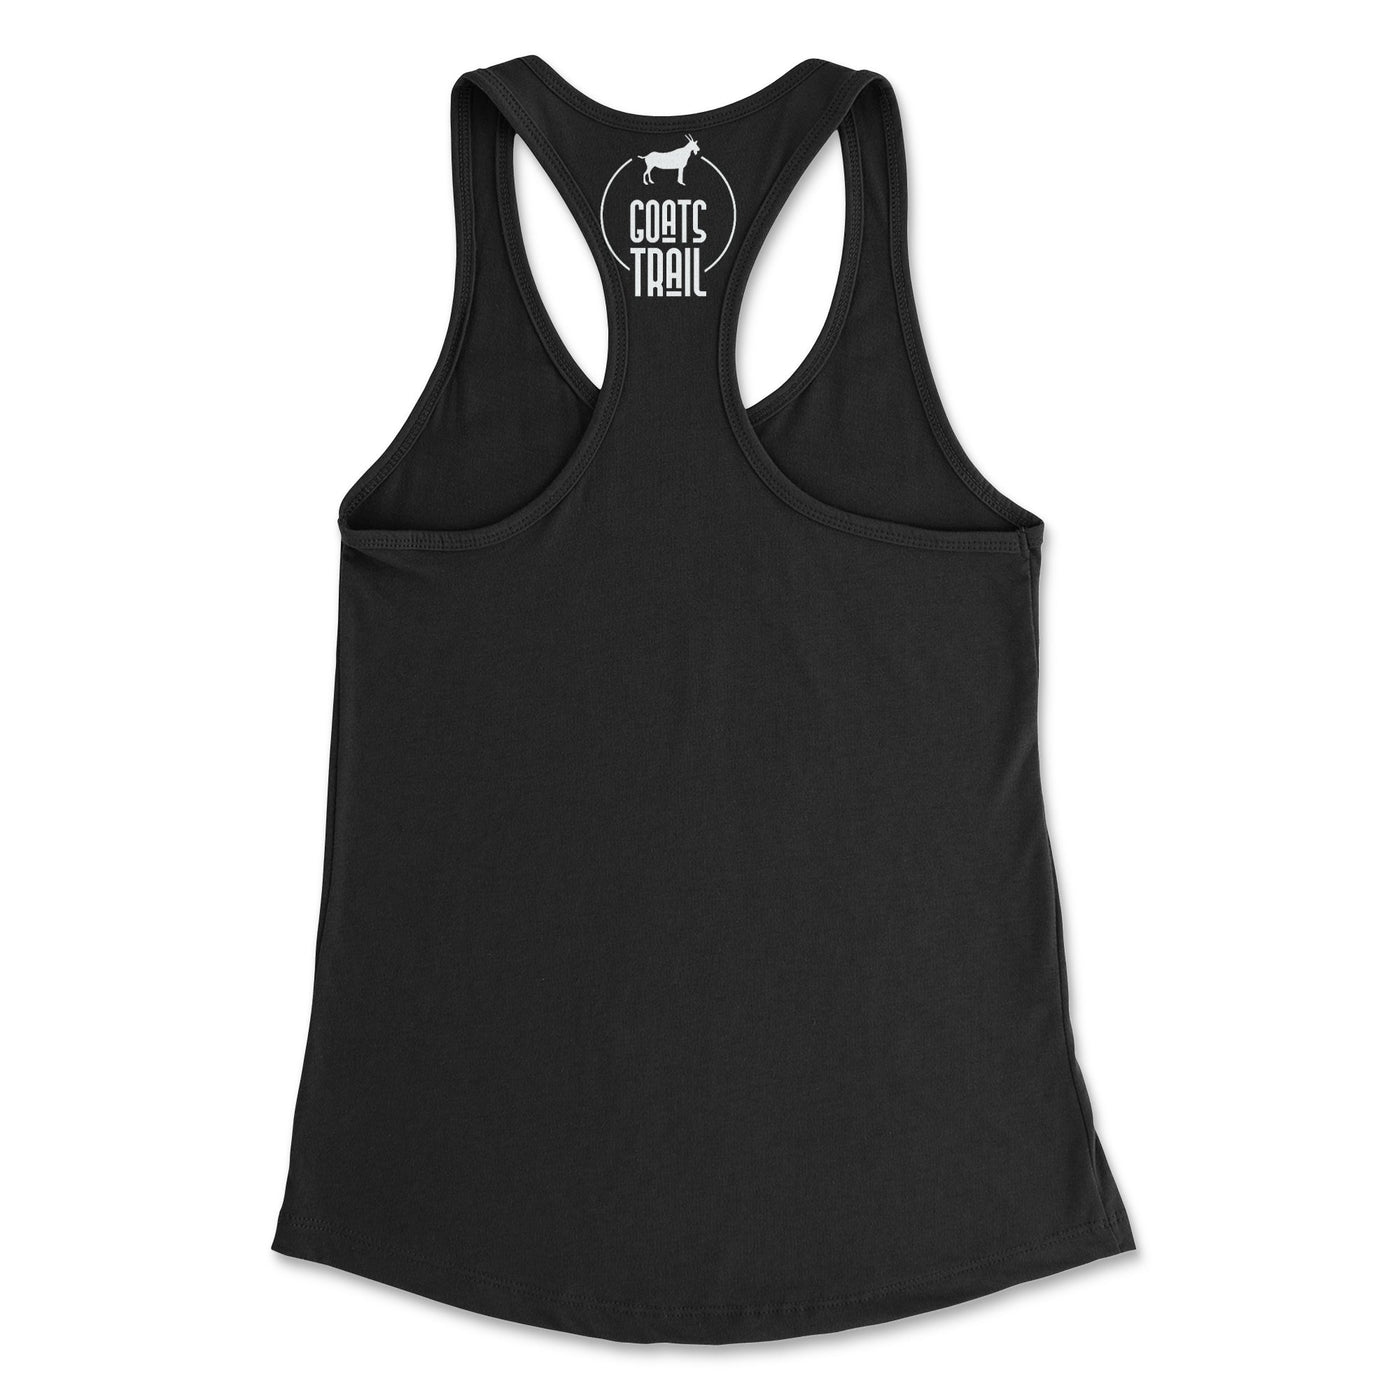 Women's Gladiator Lakebound Adventures Tank Top - Goats Trail Off-Road Apparel Company